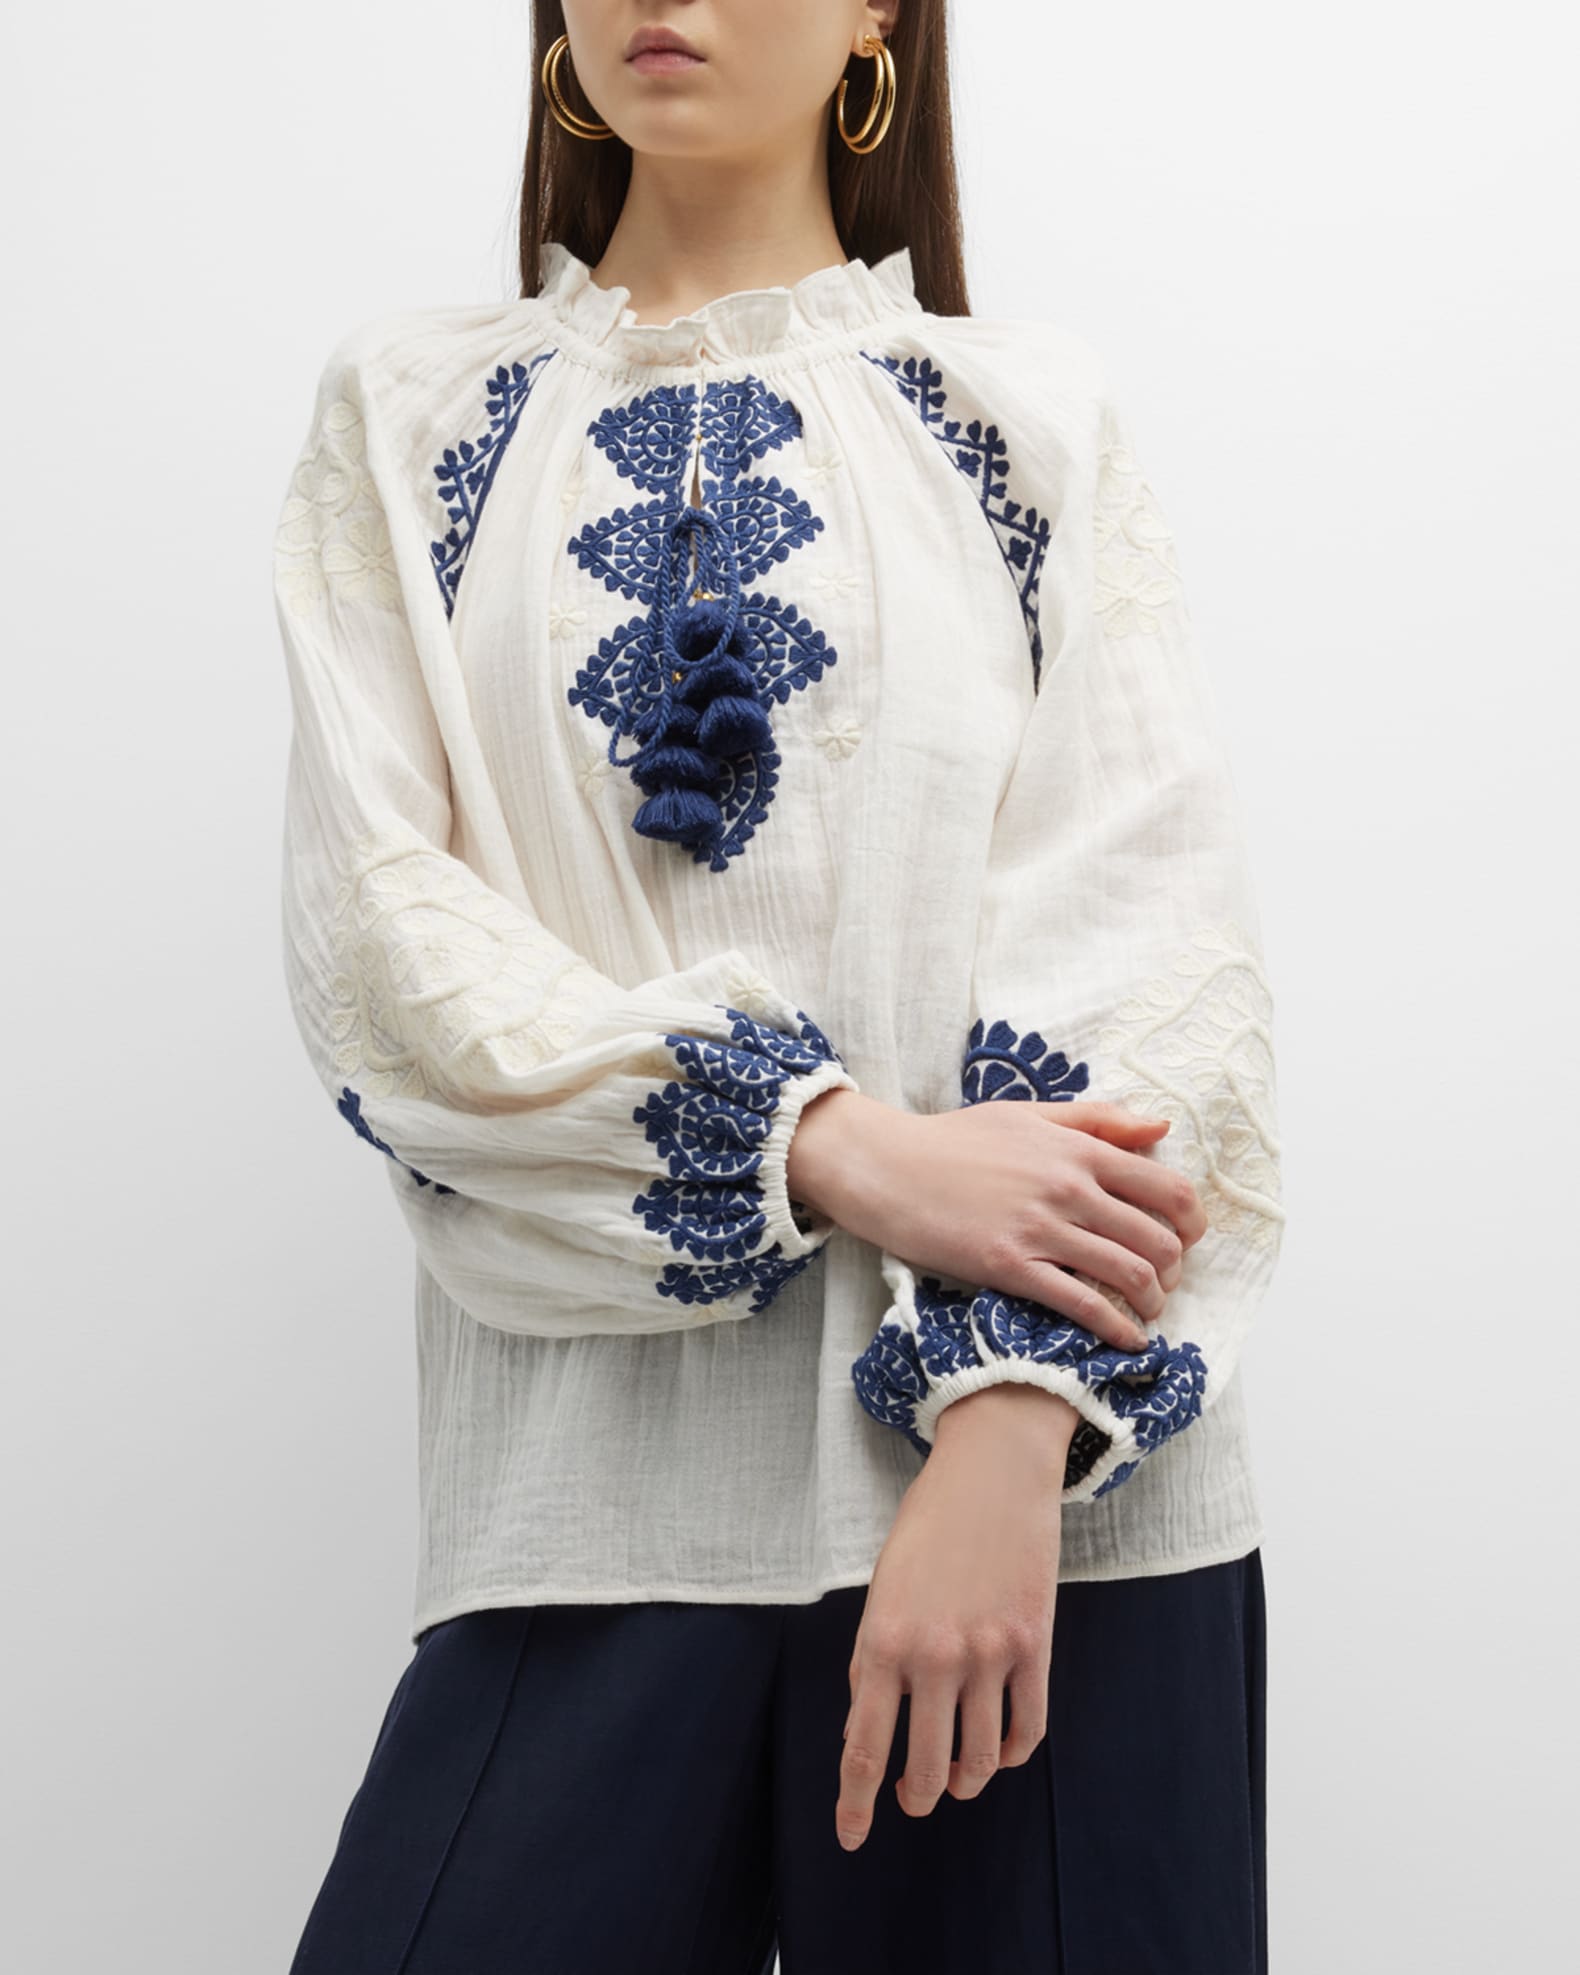 Figue Magnolia Embroidered Top | Neiman Marcus